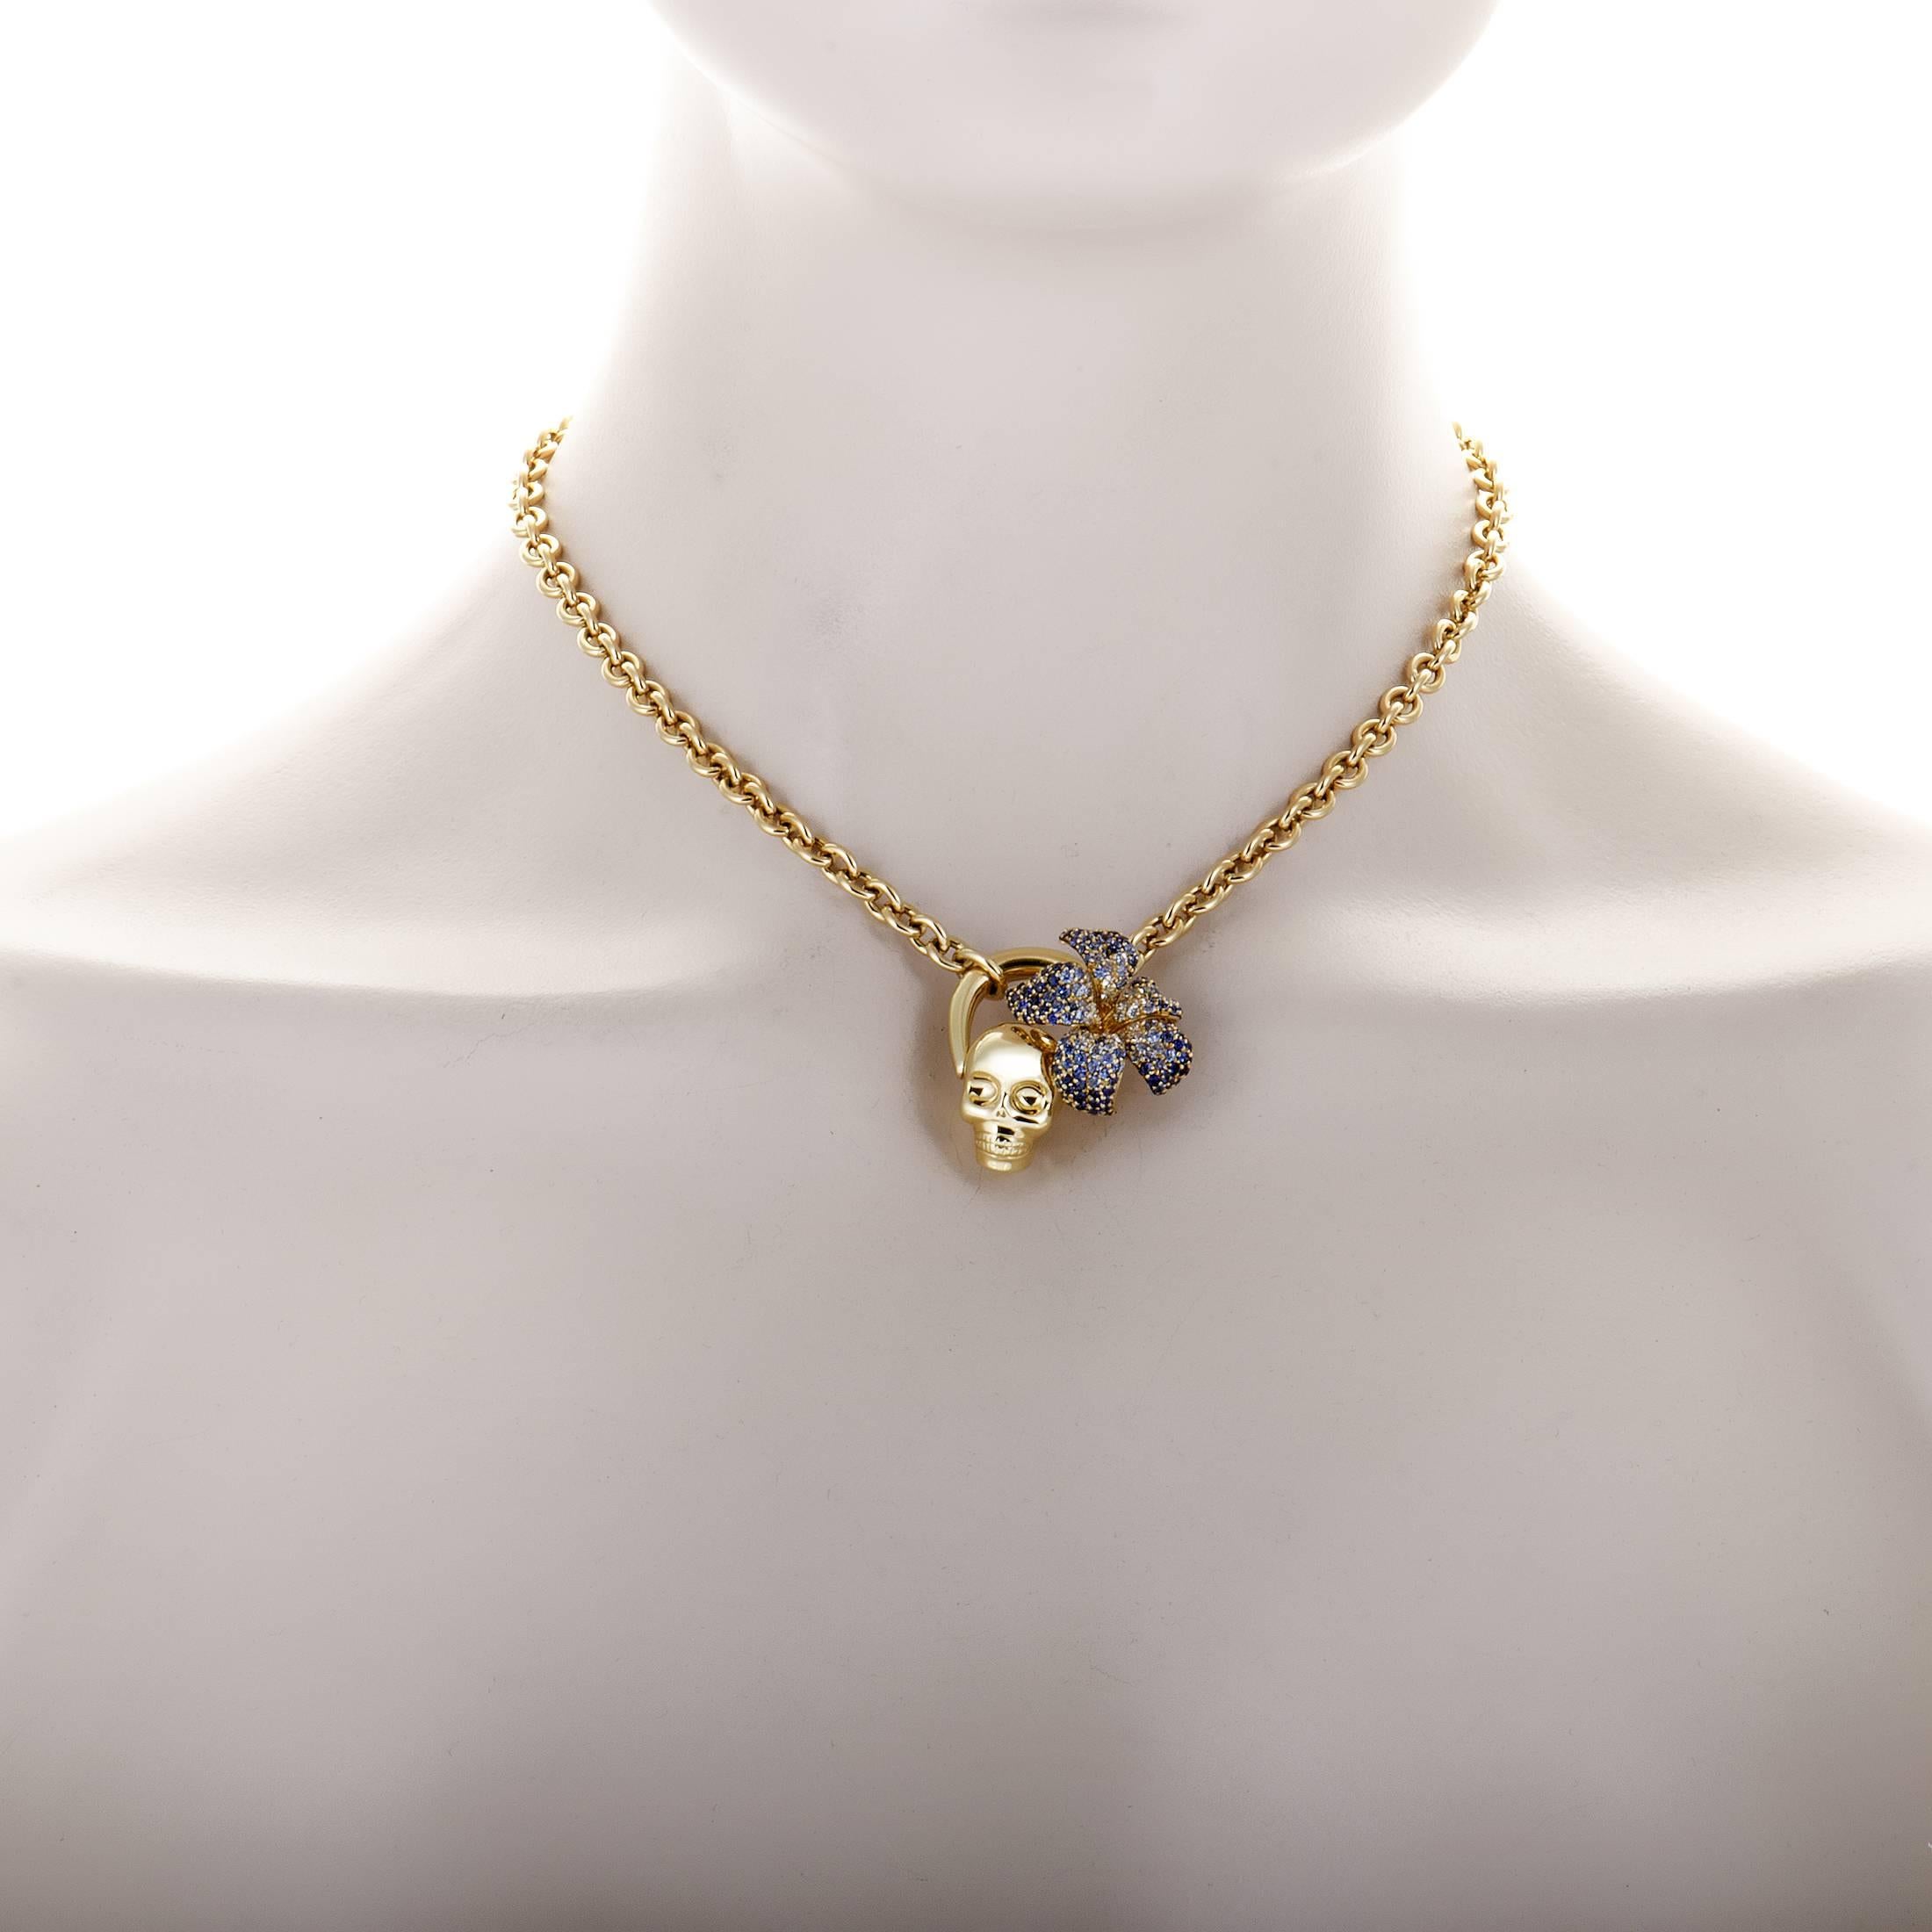 Embellished with splendid sapphires arranged in a magnificent fashion upon the gorgeous flower decoration, this remarkable 18K yellow gold necklace from Gucci's Flora collection also features an intriguing skull motif for a memorable sight.
Pendant